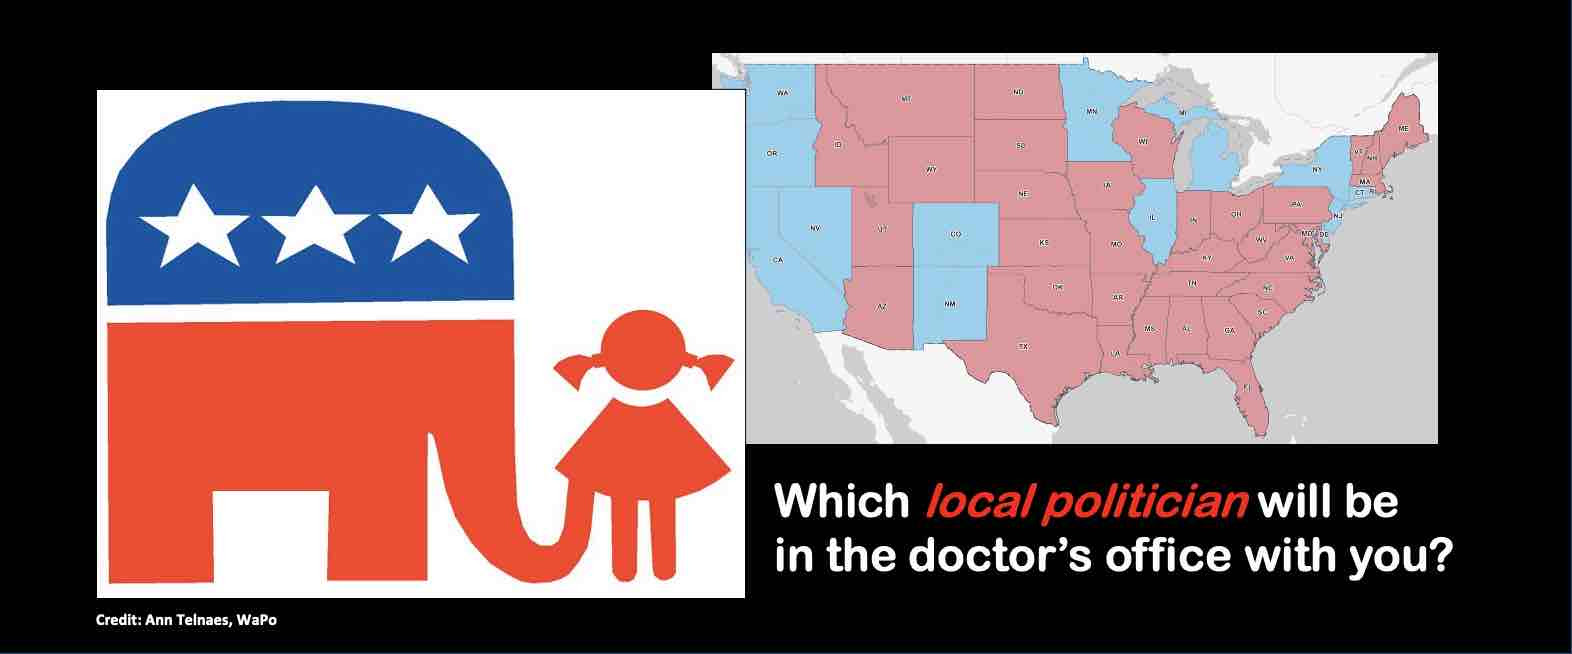 Which 'local political leader' might decide on your abortion? Check this map.